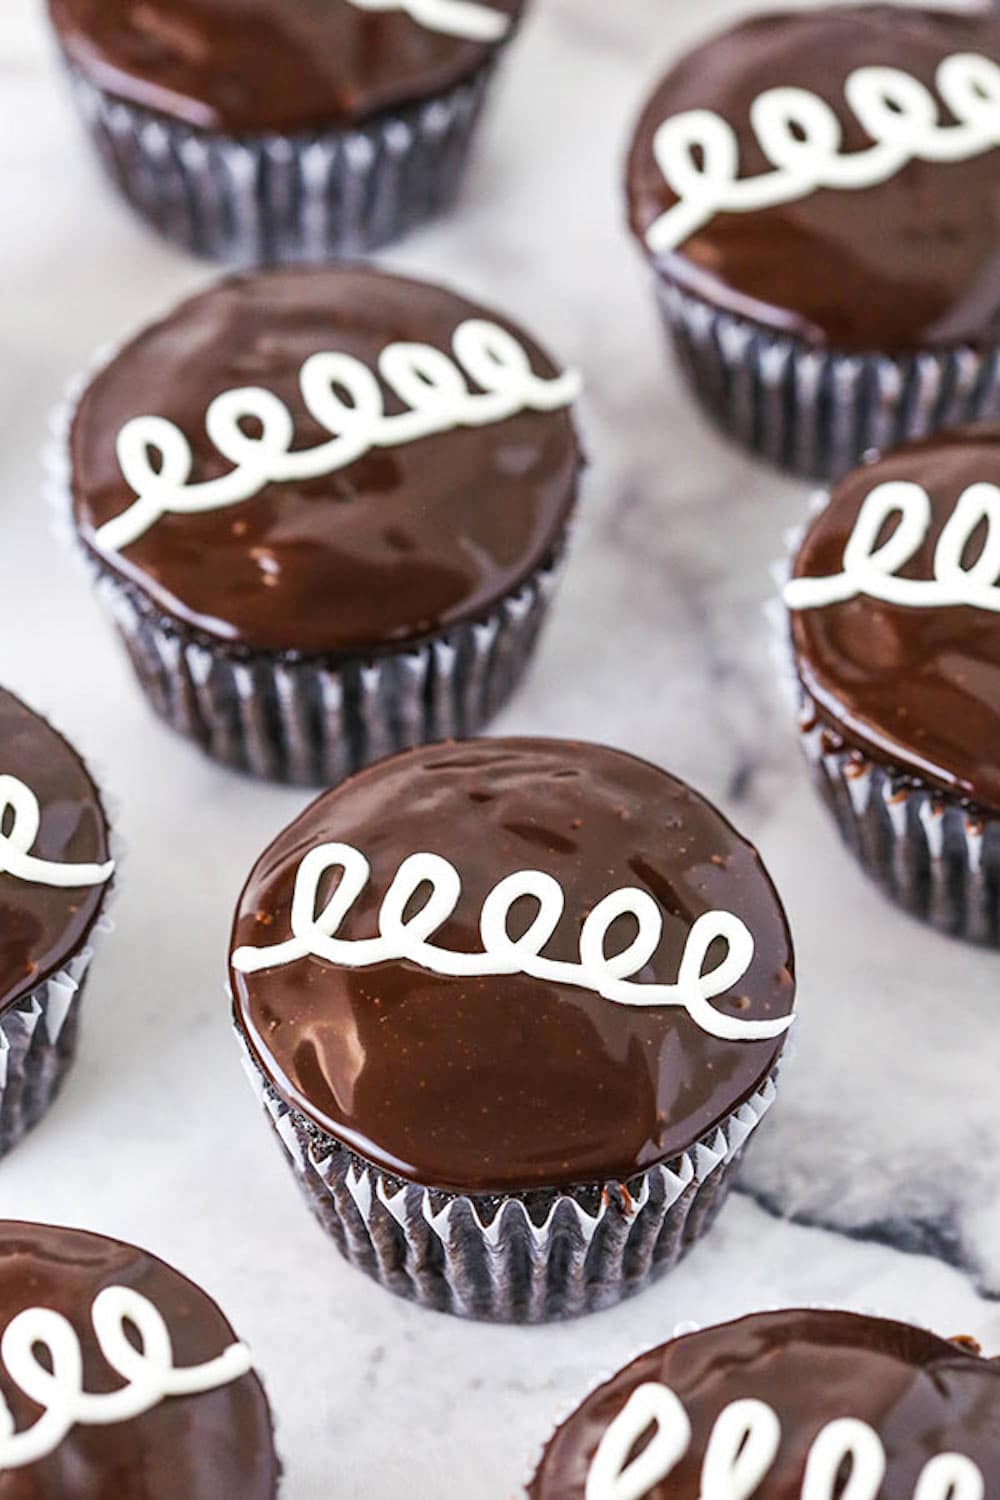 Eight Marshmallow-Filled Chocolate Cupcakes on a Marble Counter.